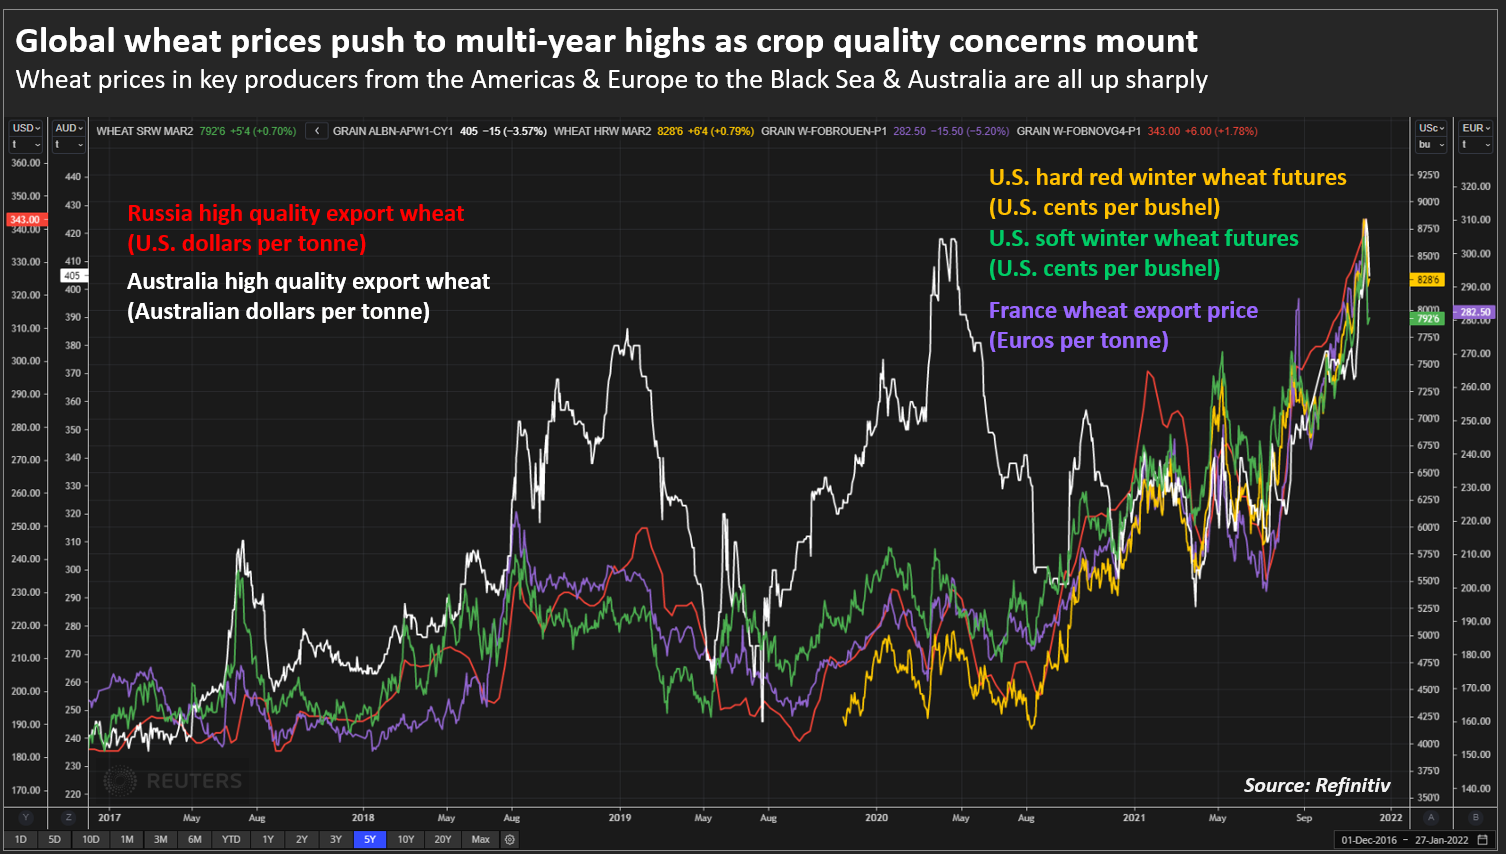 Global wheat prices push to multi-year highs as crop quality concerns mount